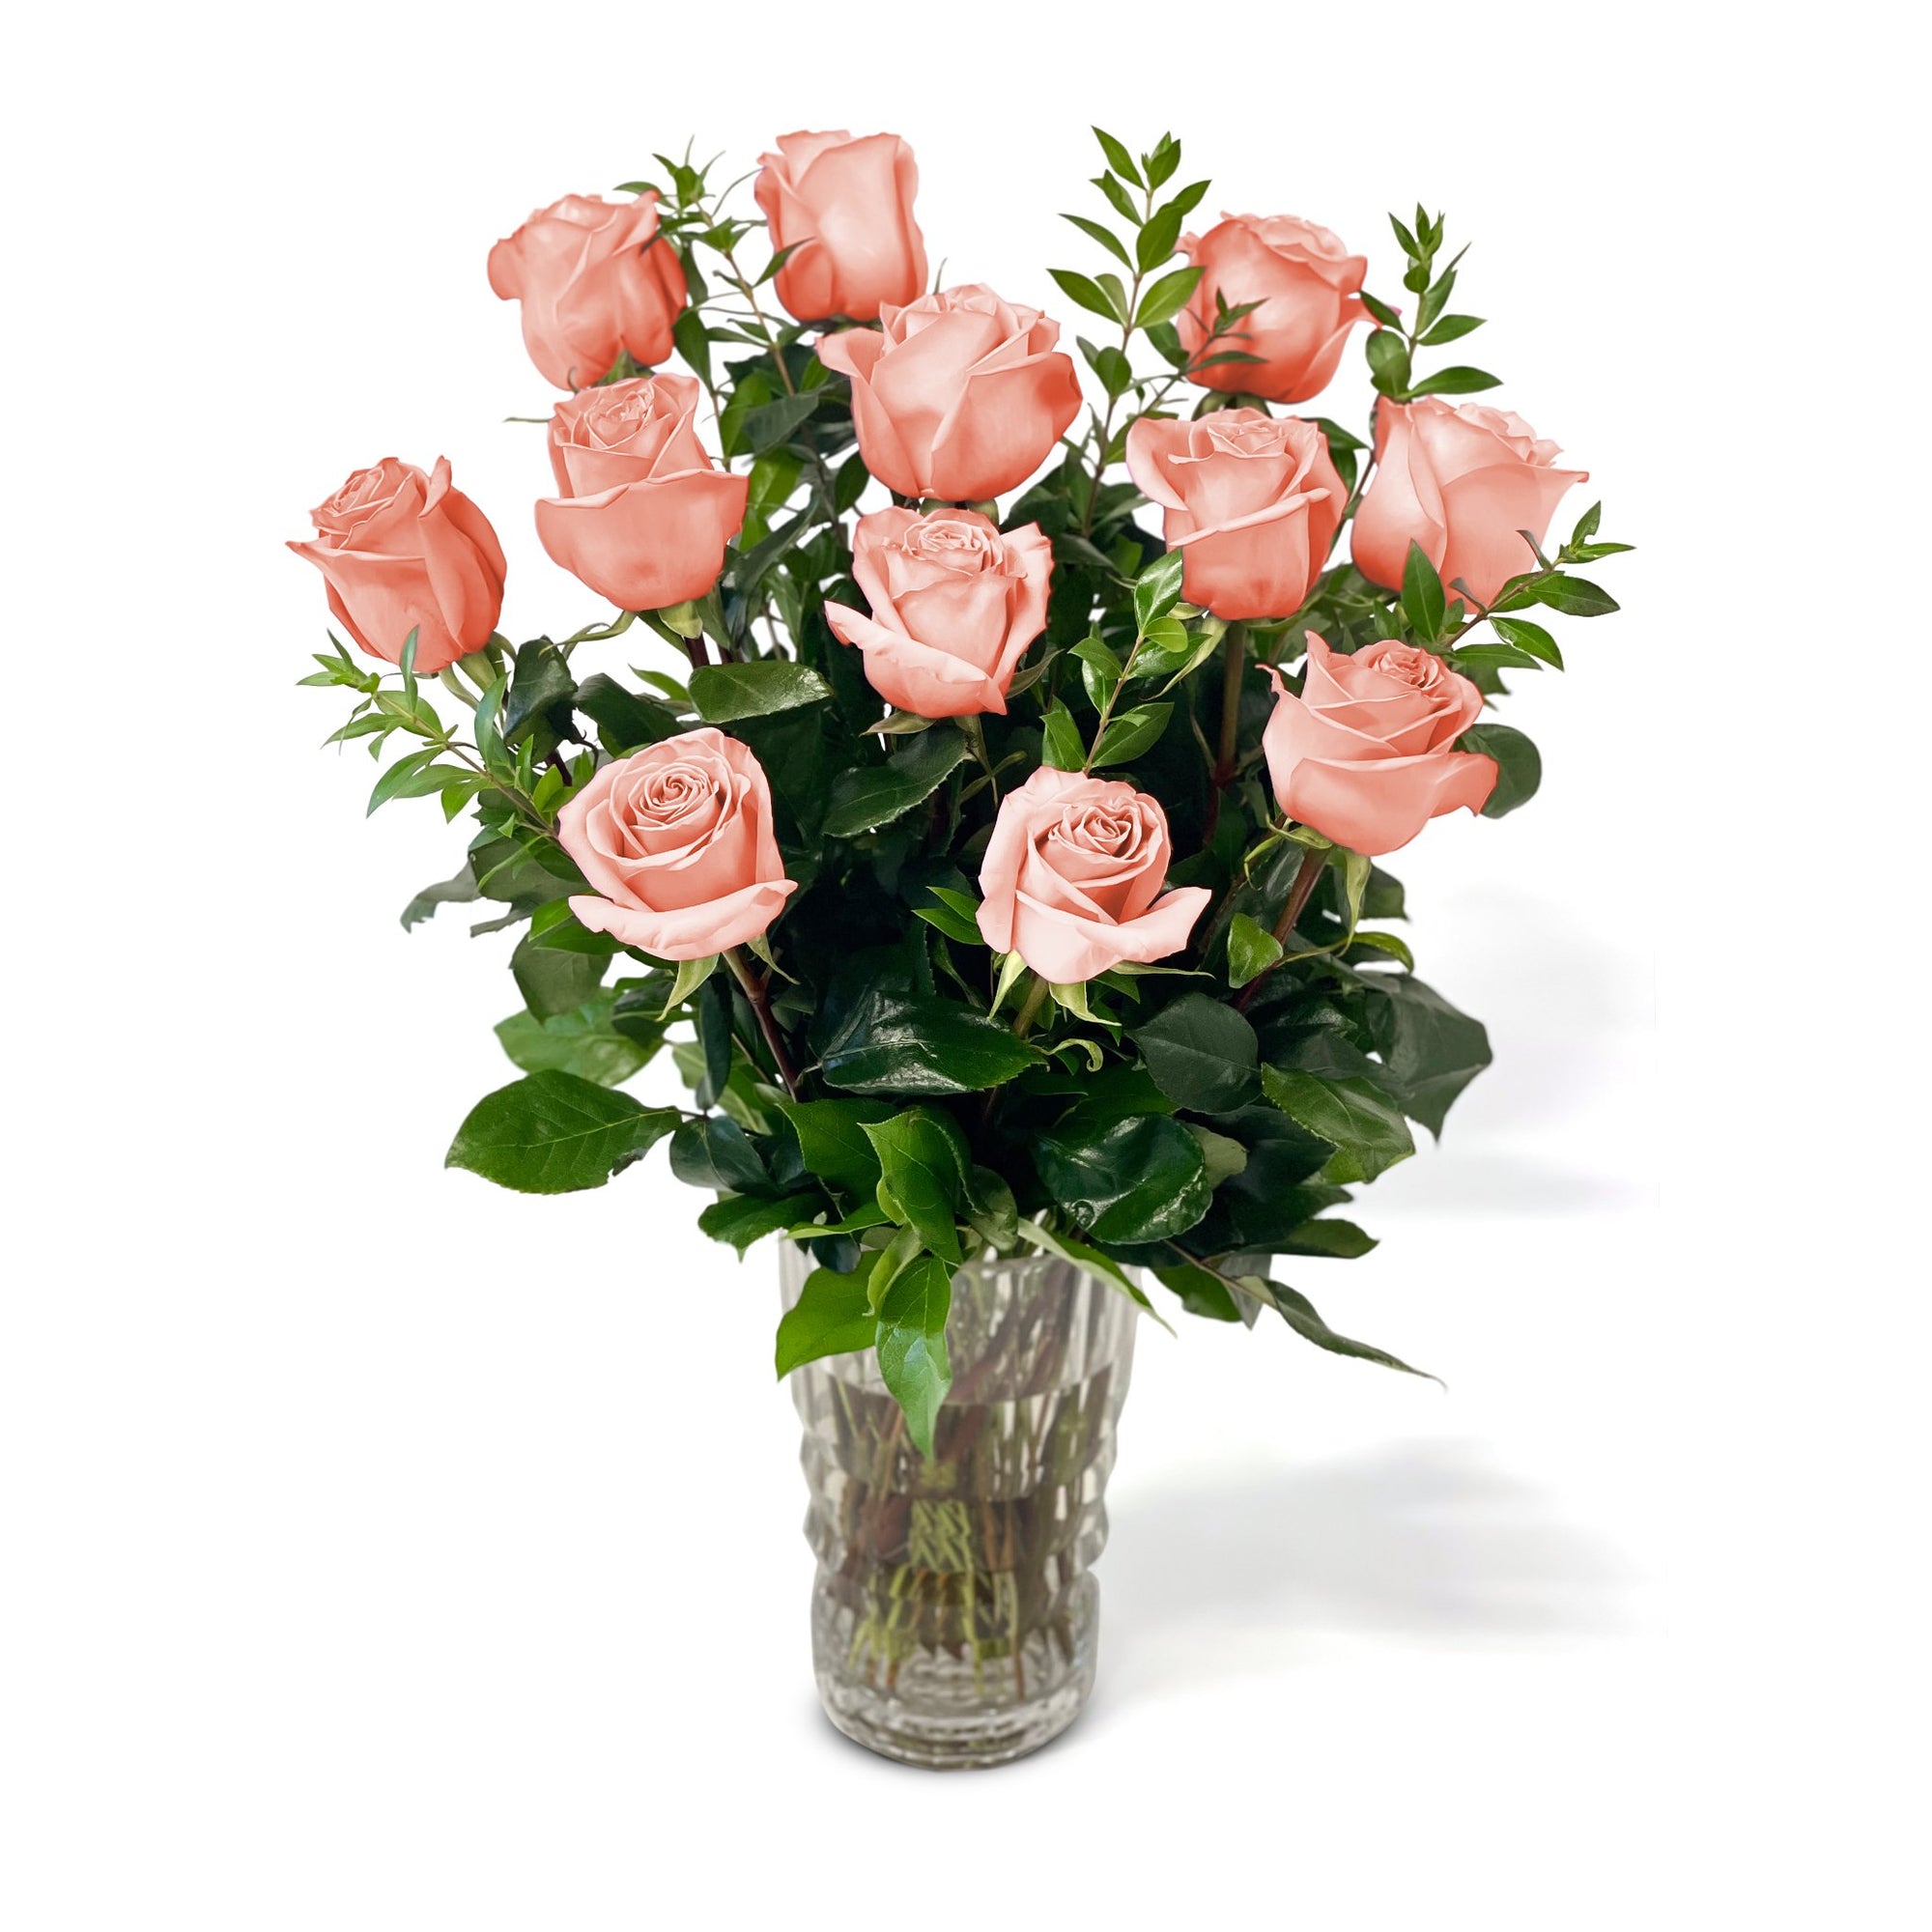 NYC Flower Delivery - Fresh Roses in a Crystal Vase | Peach - 1 Dozen - Roses